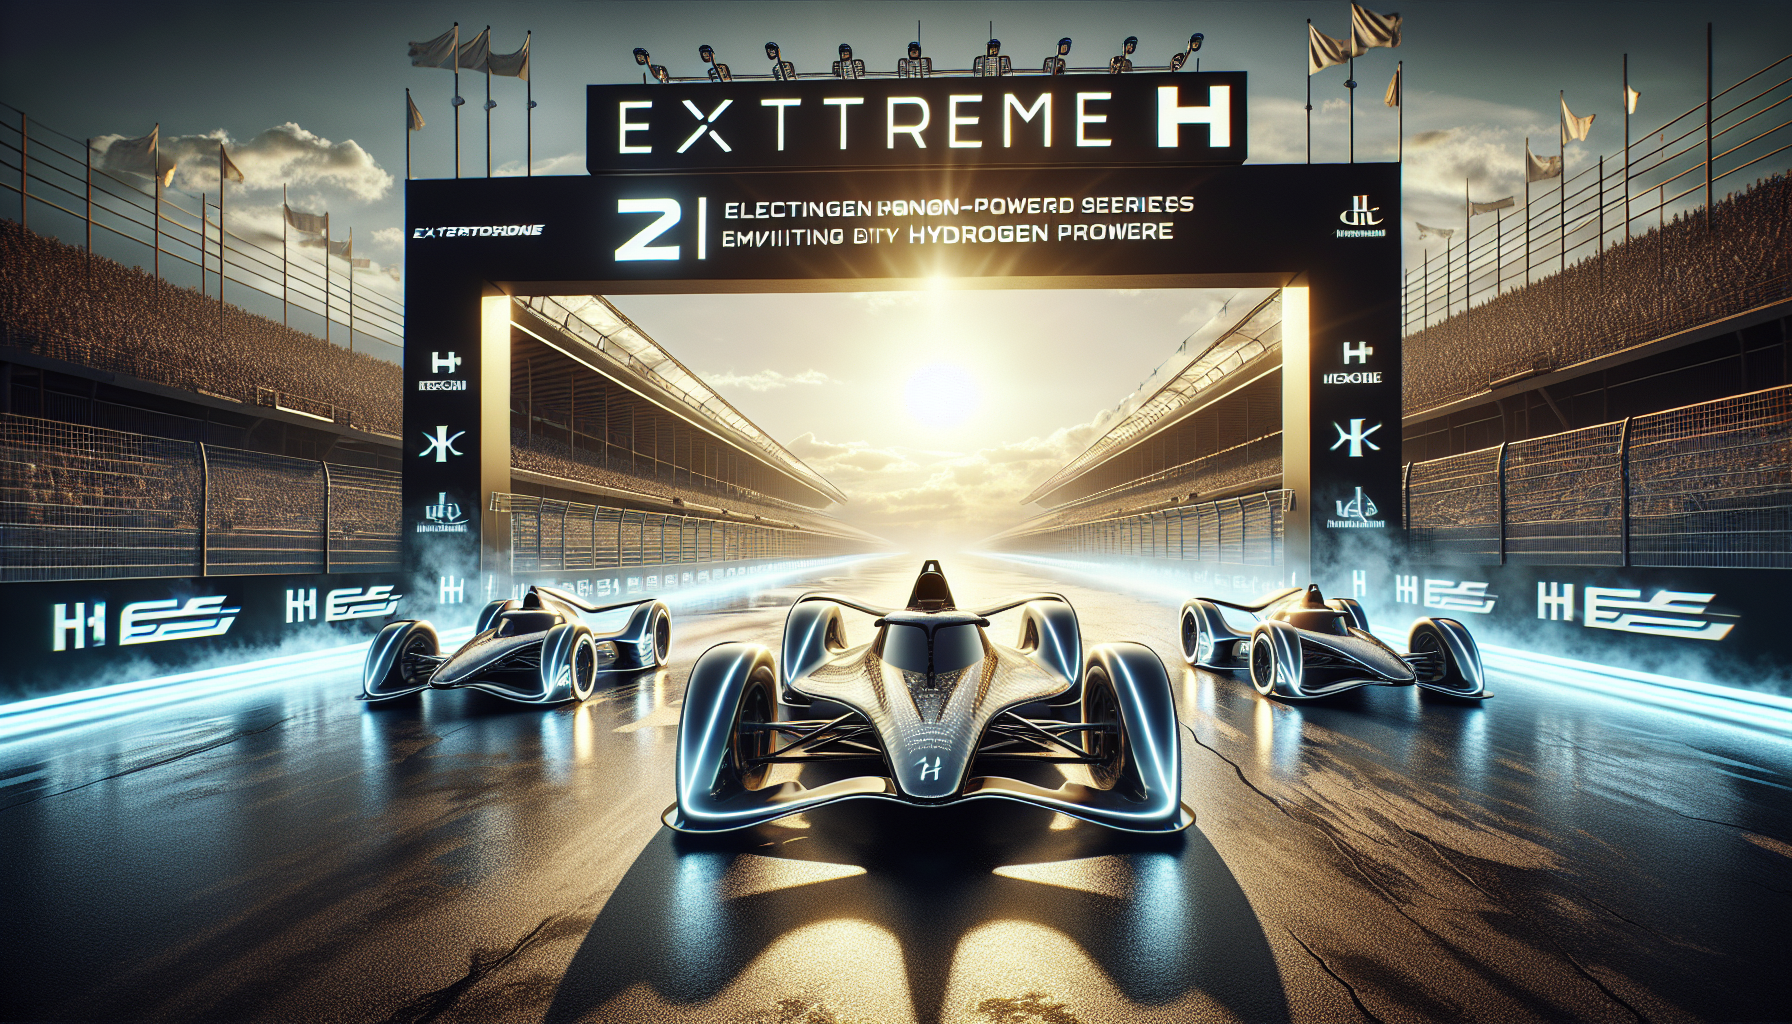 Extreme E changes its name to Extreme H, introducing a hydrogen-powered racing series set to debut in 2025.